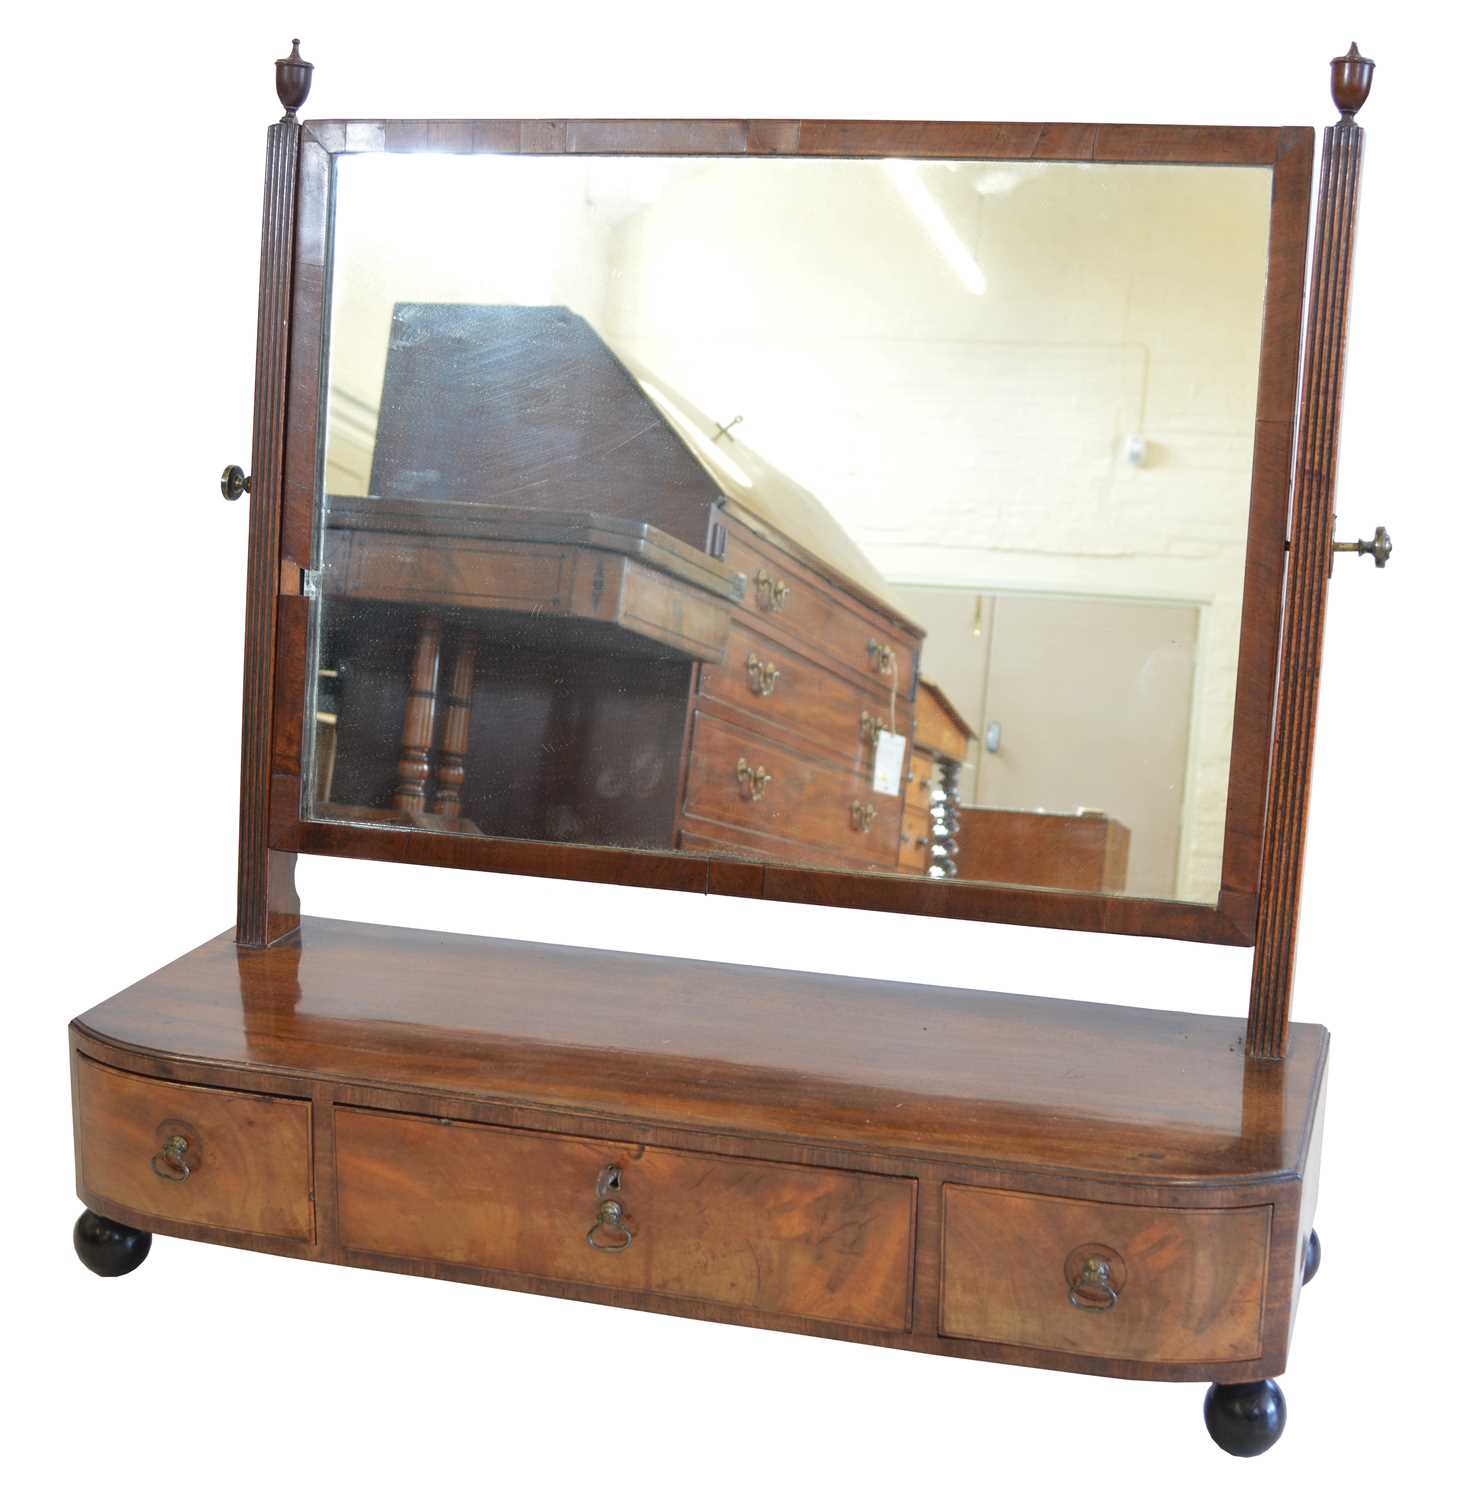 Lot 247 - Early 19th-century dressing table mirror